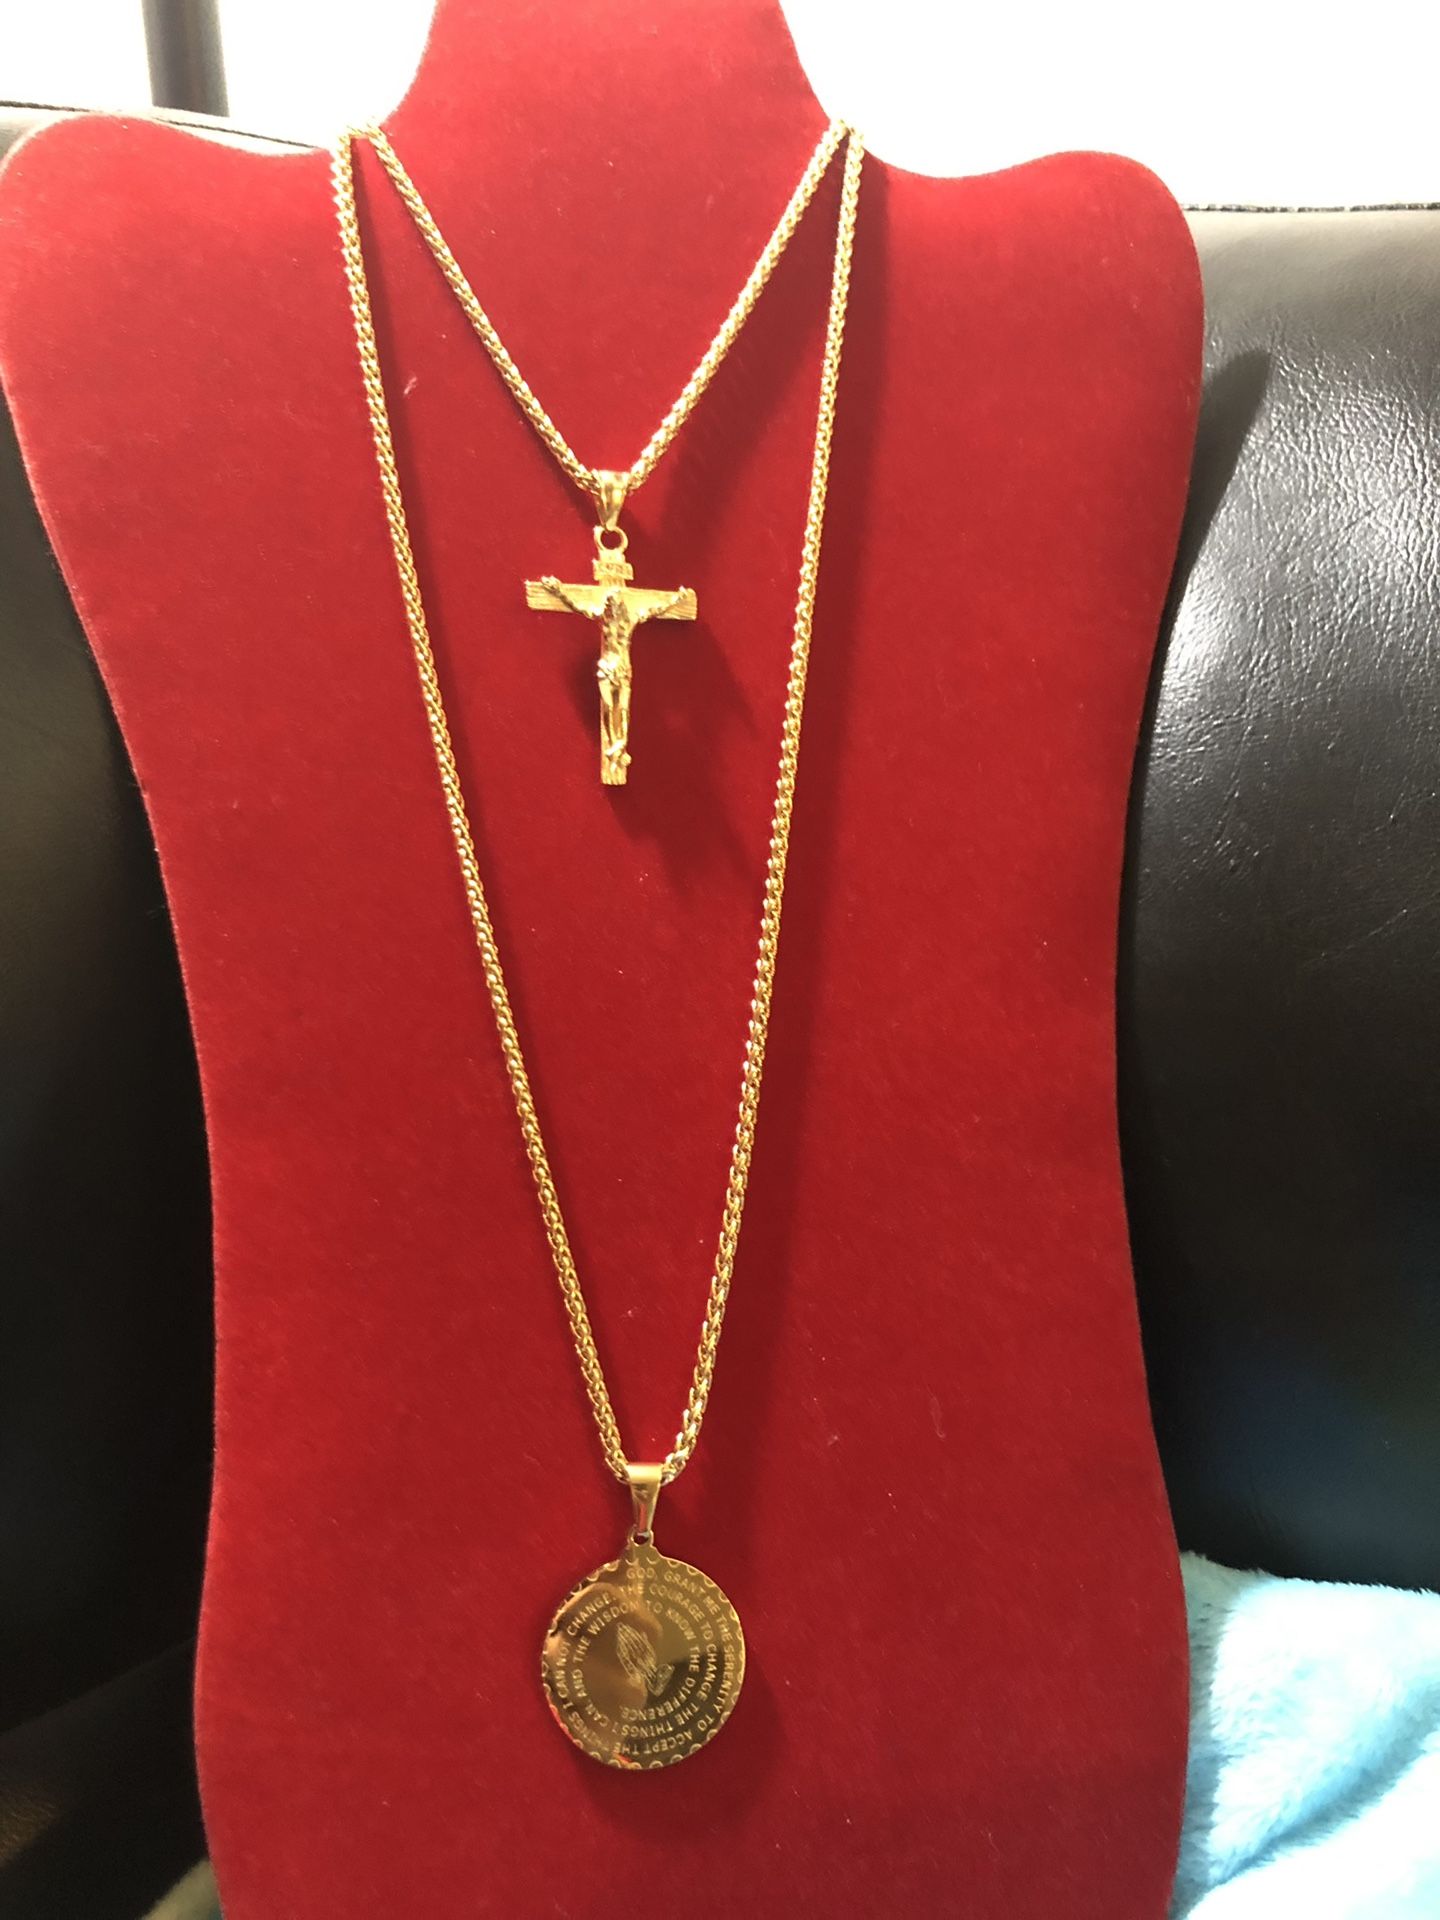 New gold plated chain and pendant